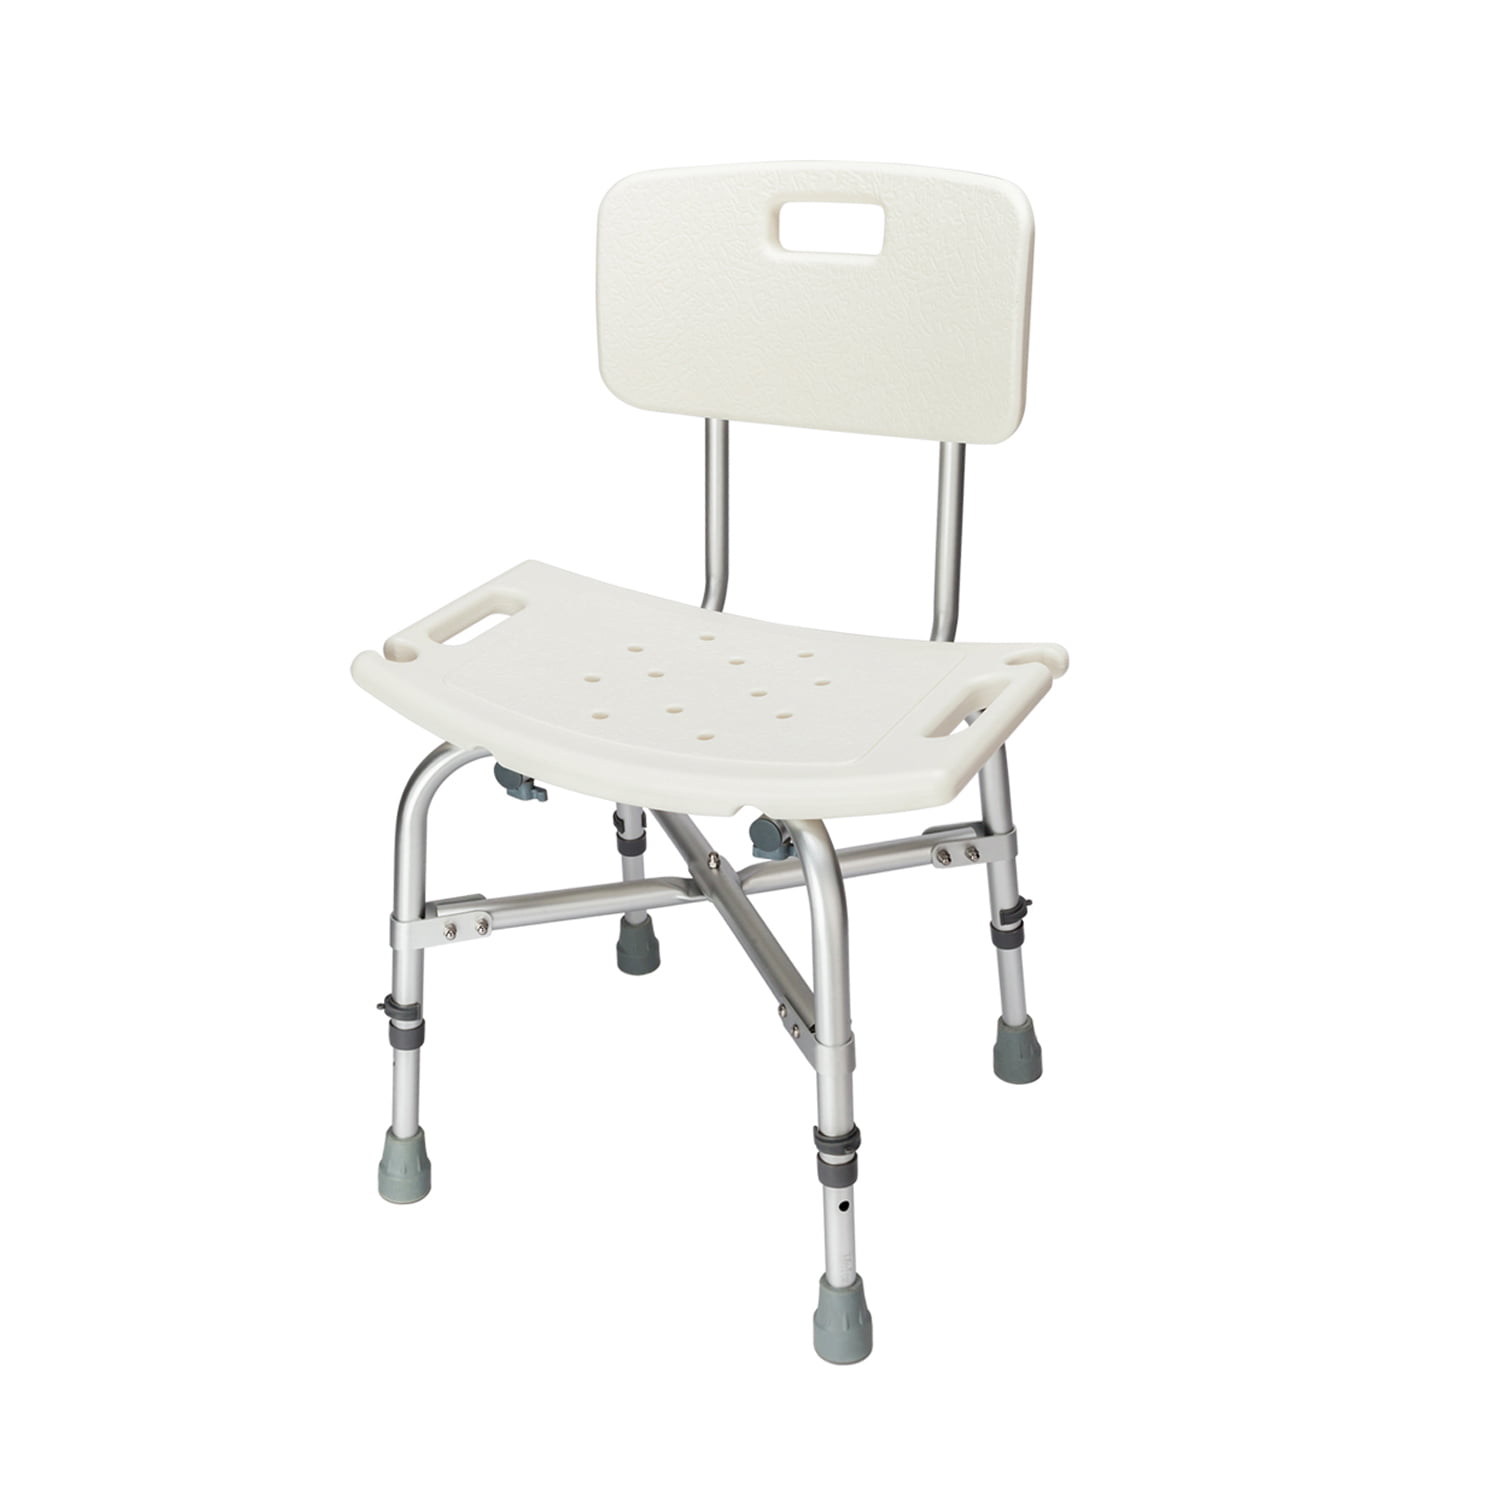 Creatice Shower Chair For Elderly Person for Large Space